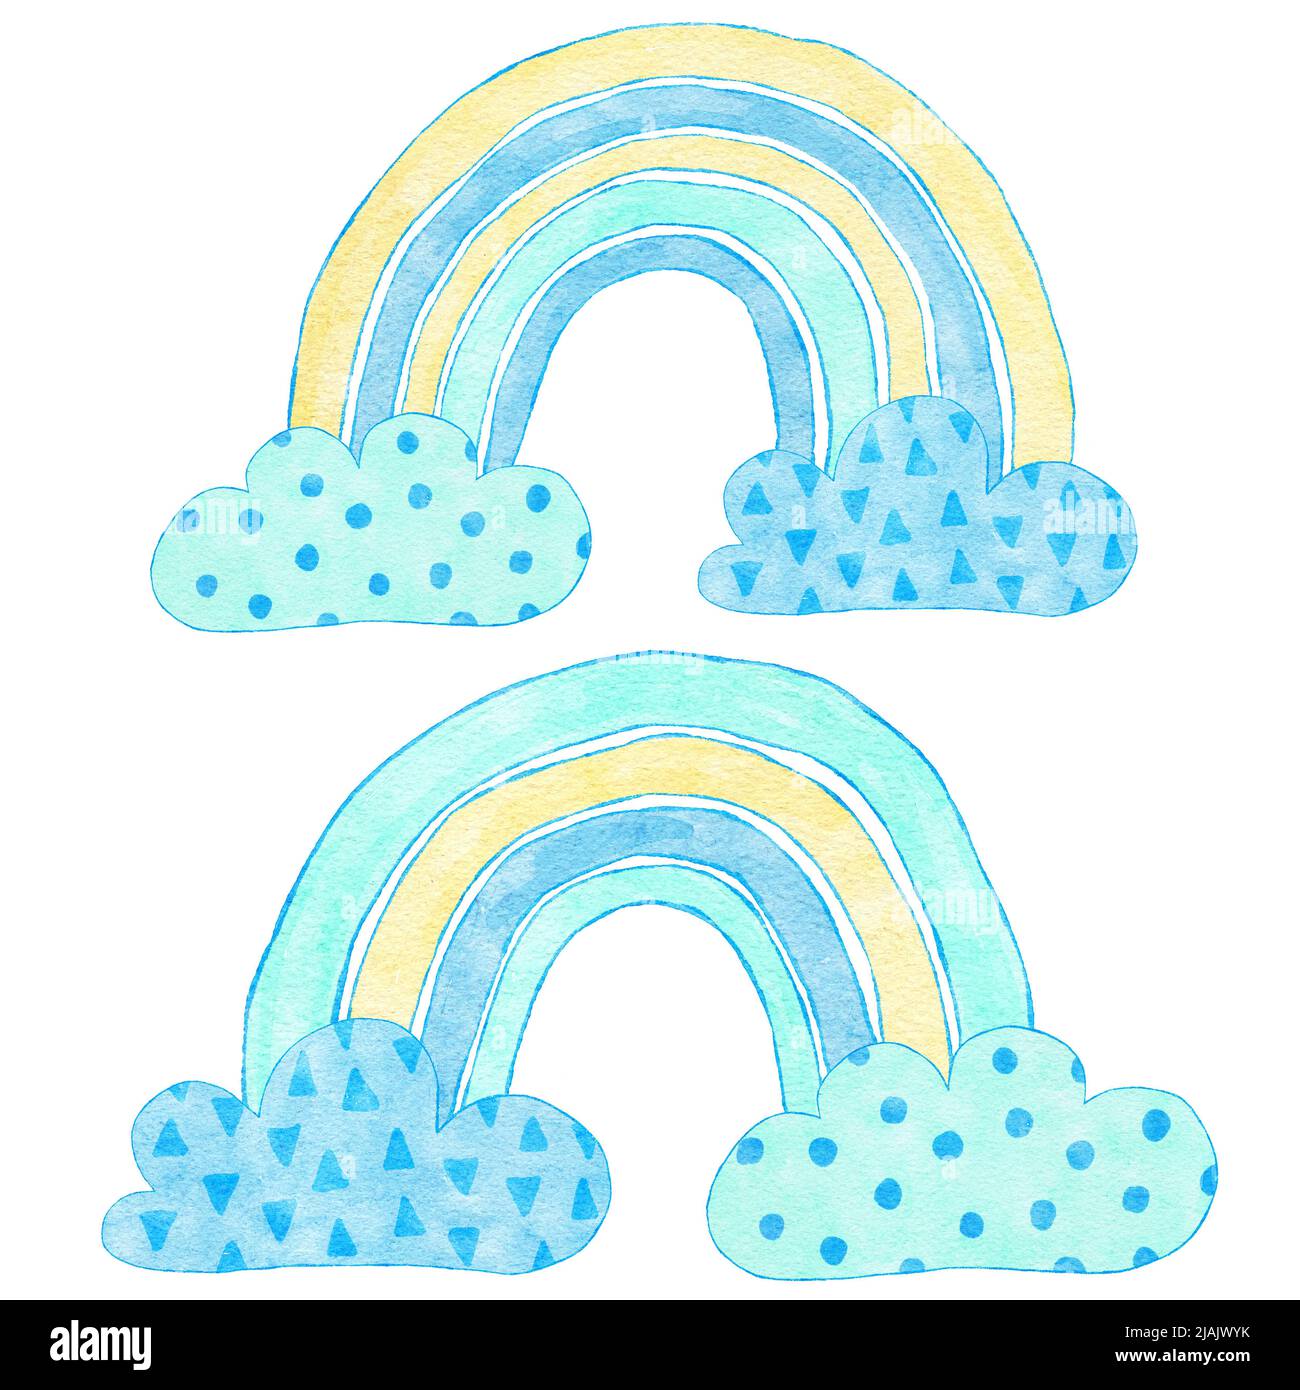 Watercolor hand drawn illustration of blue yellow rainbows in clouds. Boy baby shower design for invitations greeting party, nursery clipart is soft pastelcolors modern minimalist print for kids children Stock Photo